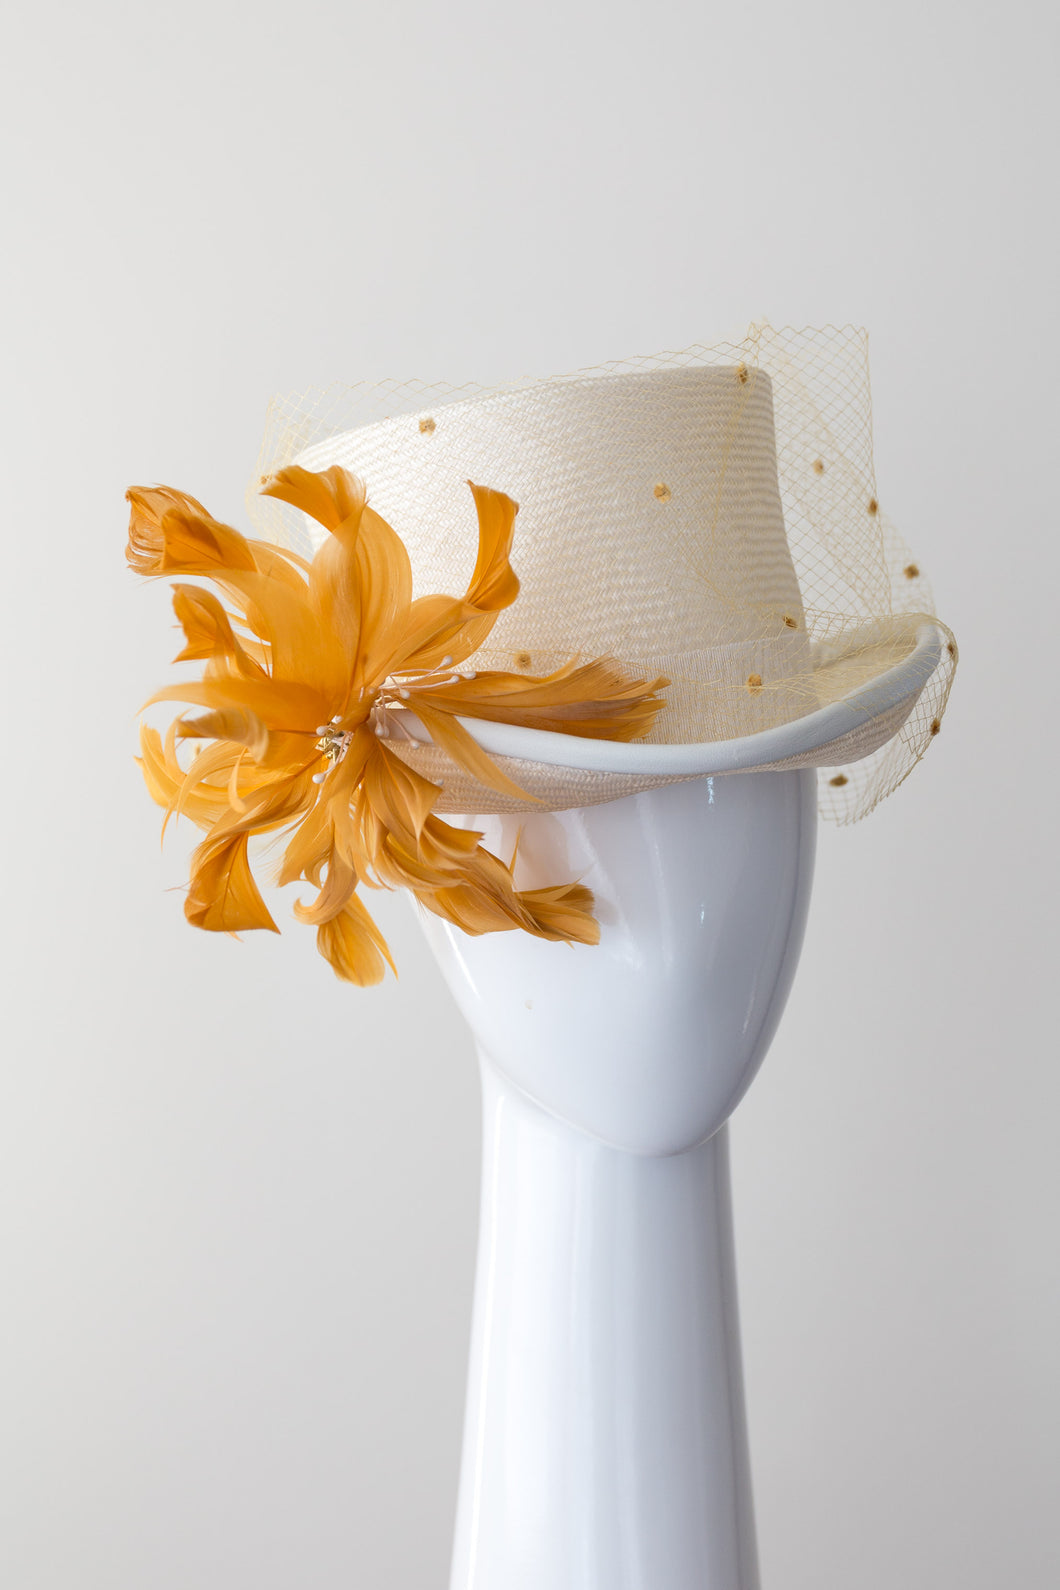 SIENNA-cream and mustard top hat with veiling and leather trim